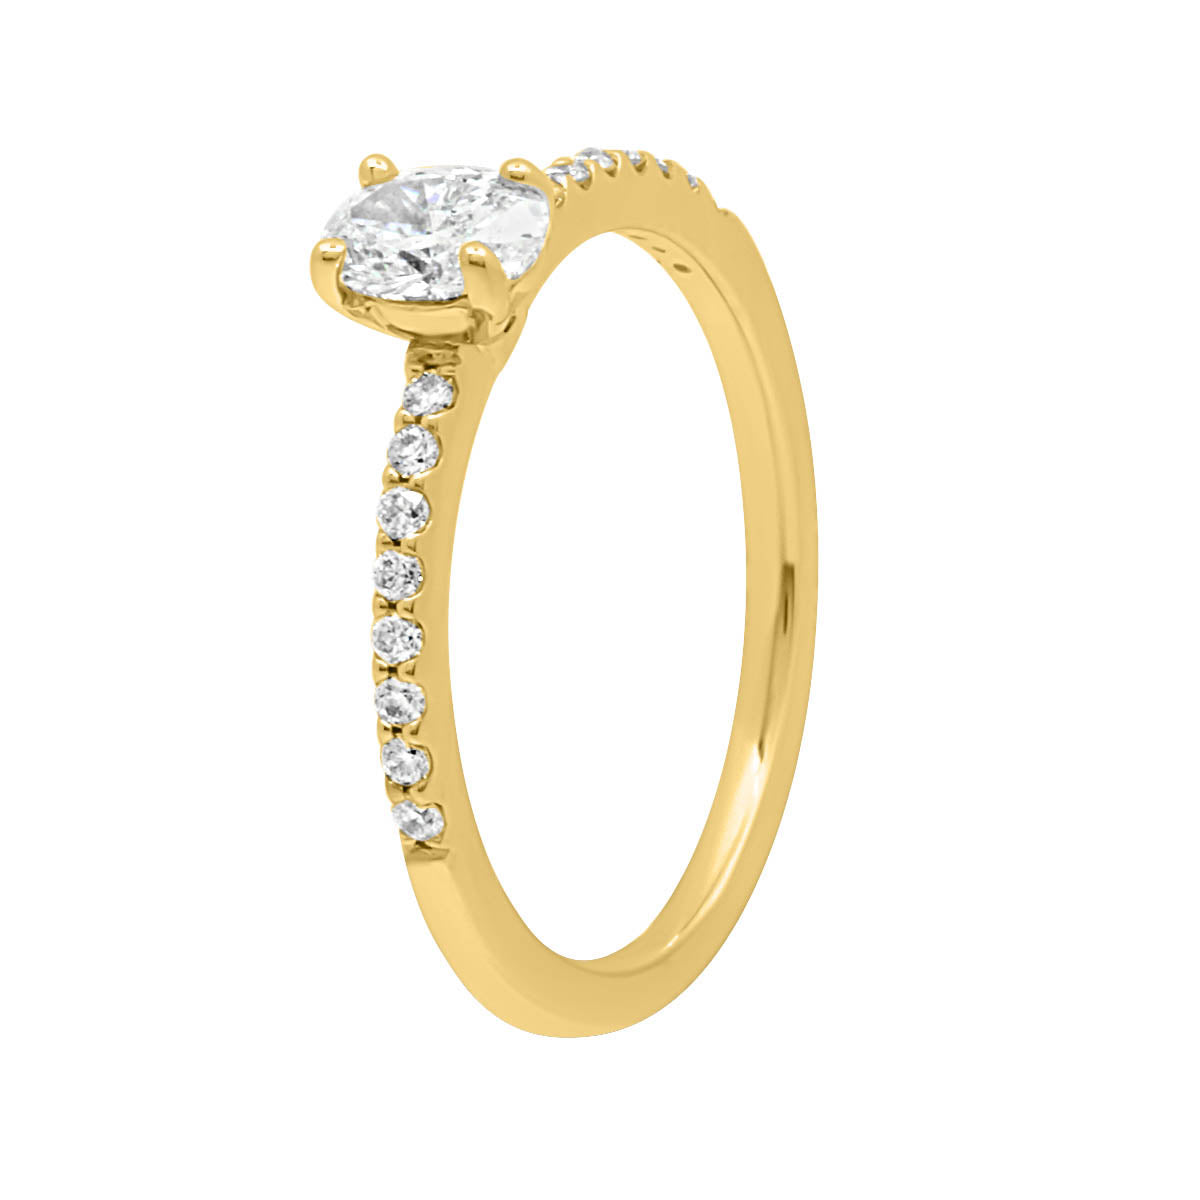 Oval with Scallop Set Band in yellow gold in an angled position